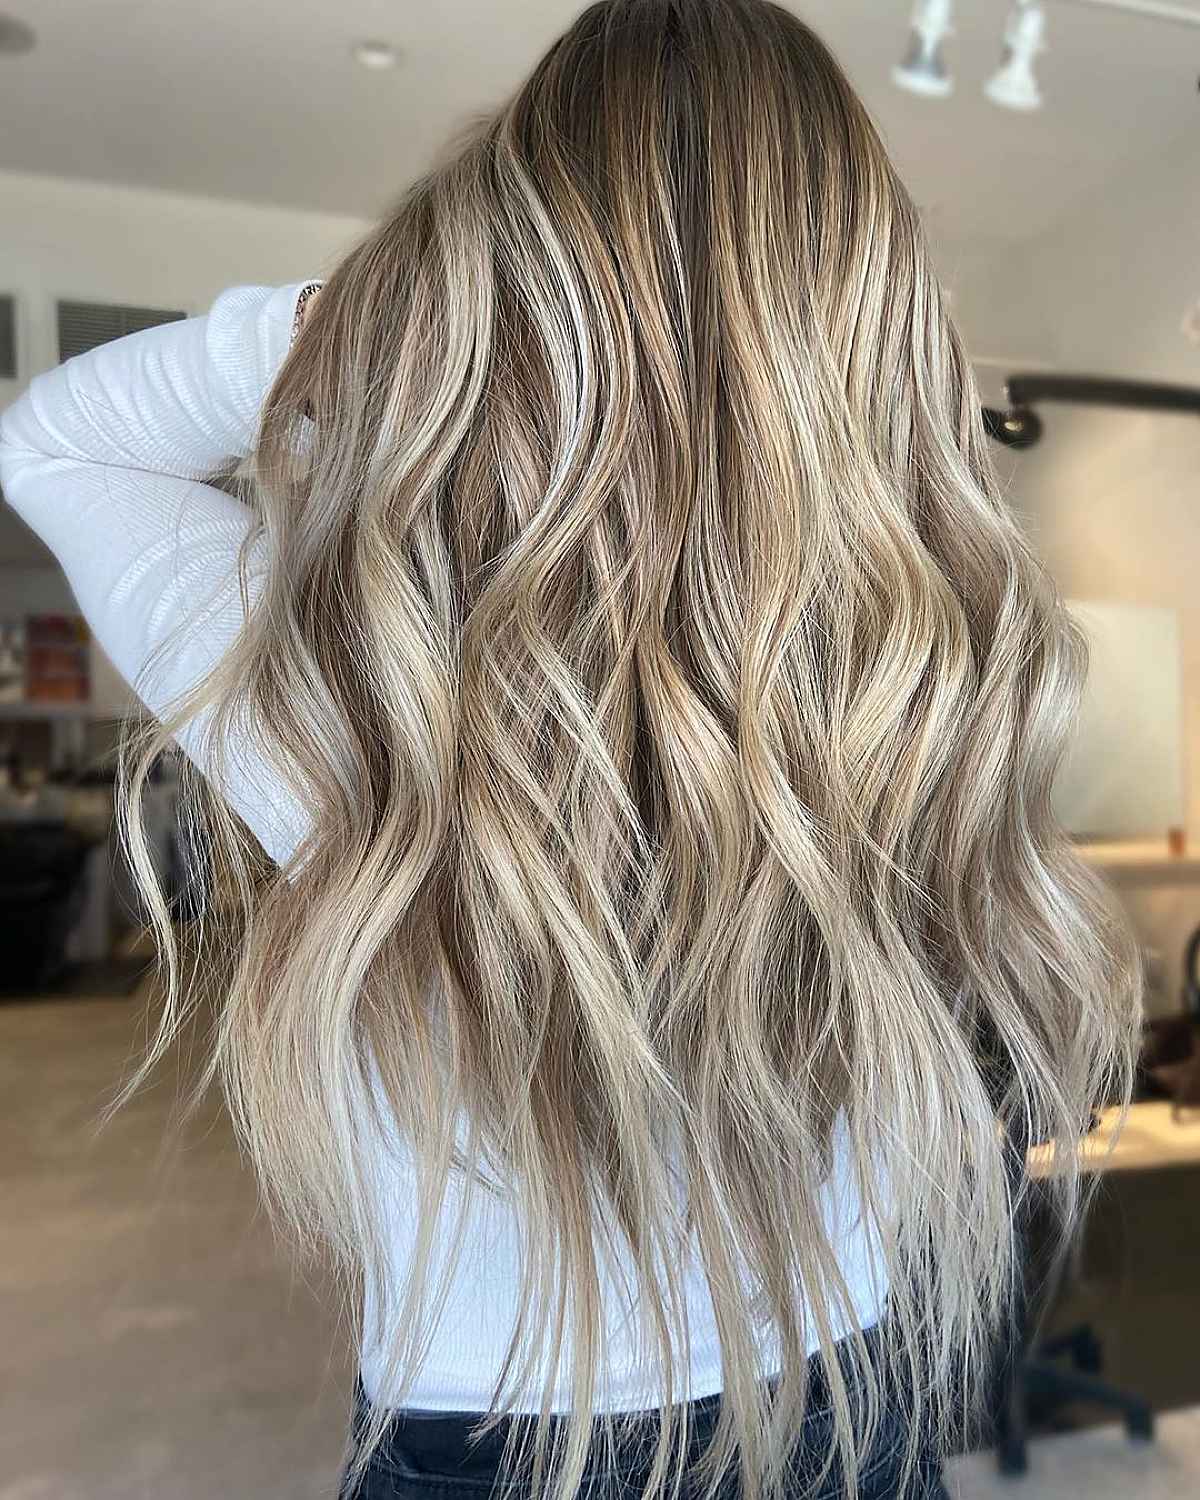 Gorgeous dirty blonde hair with highlights